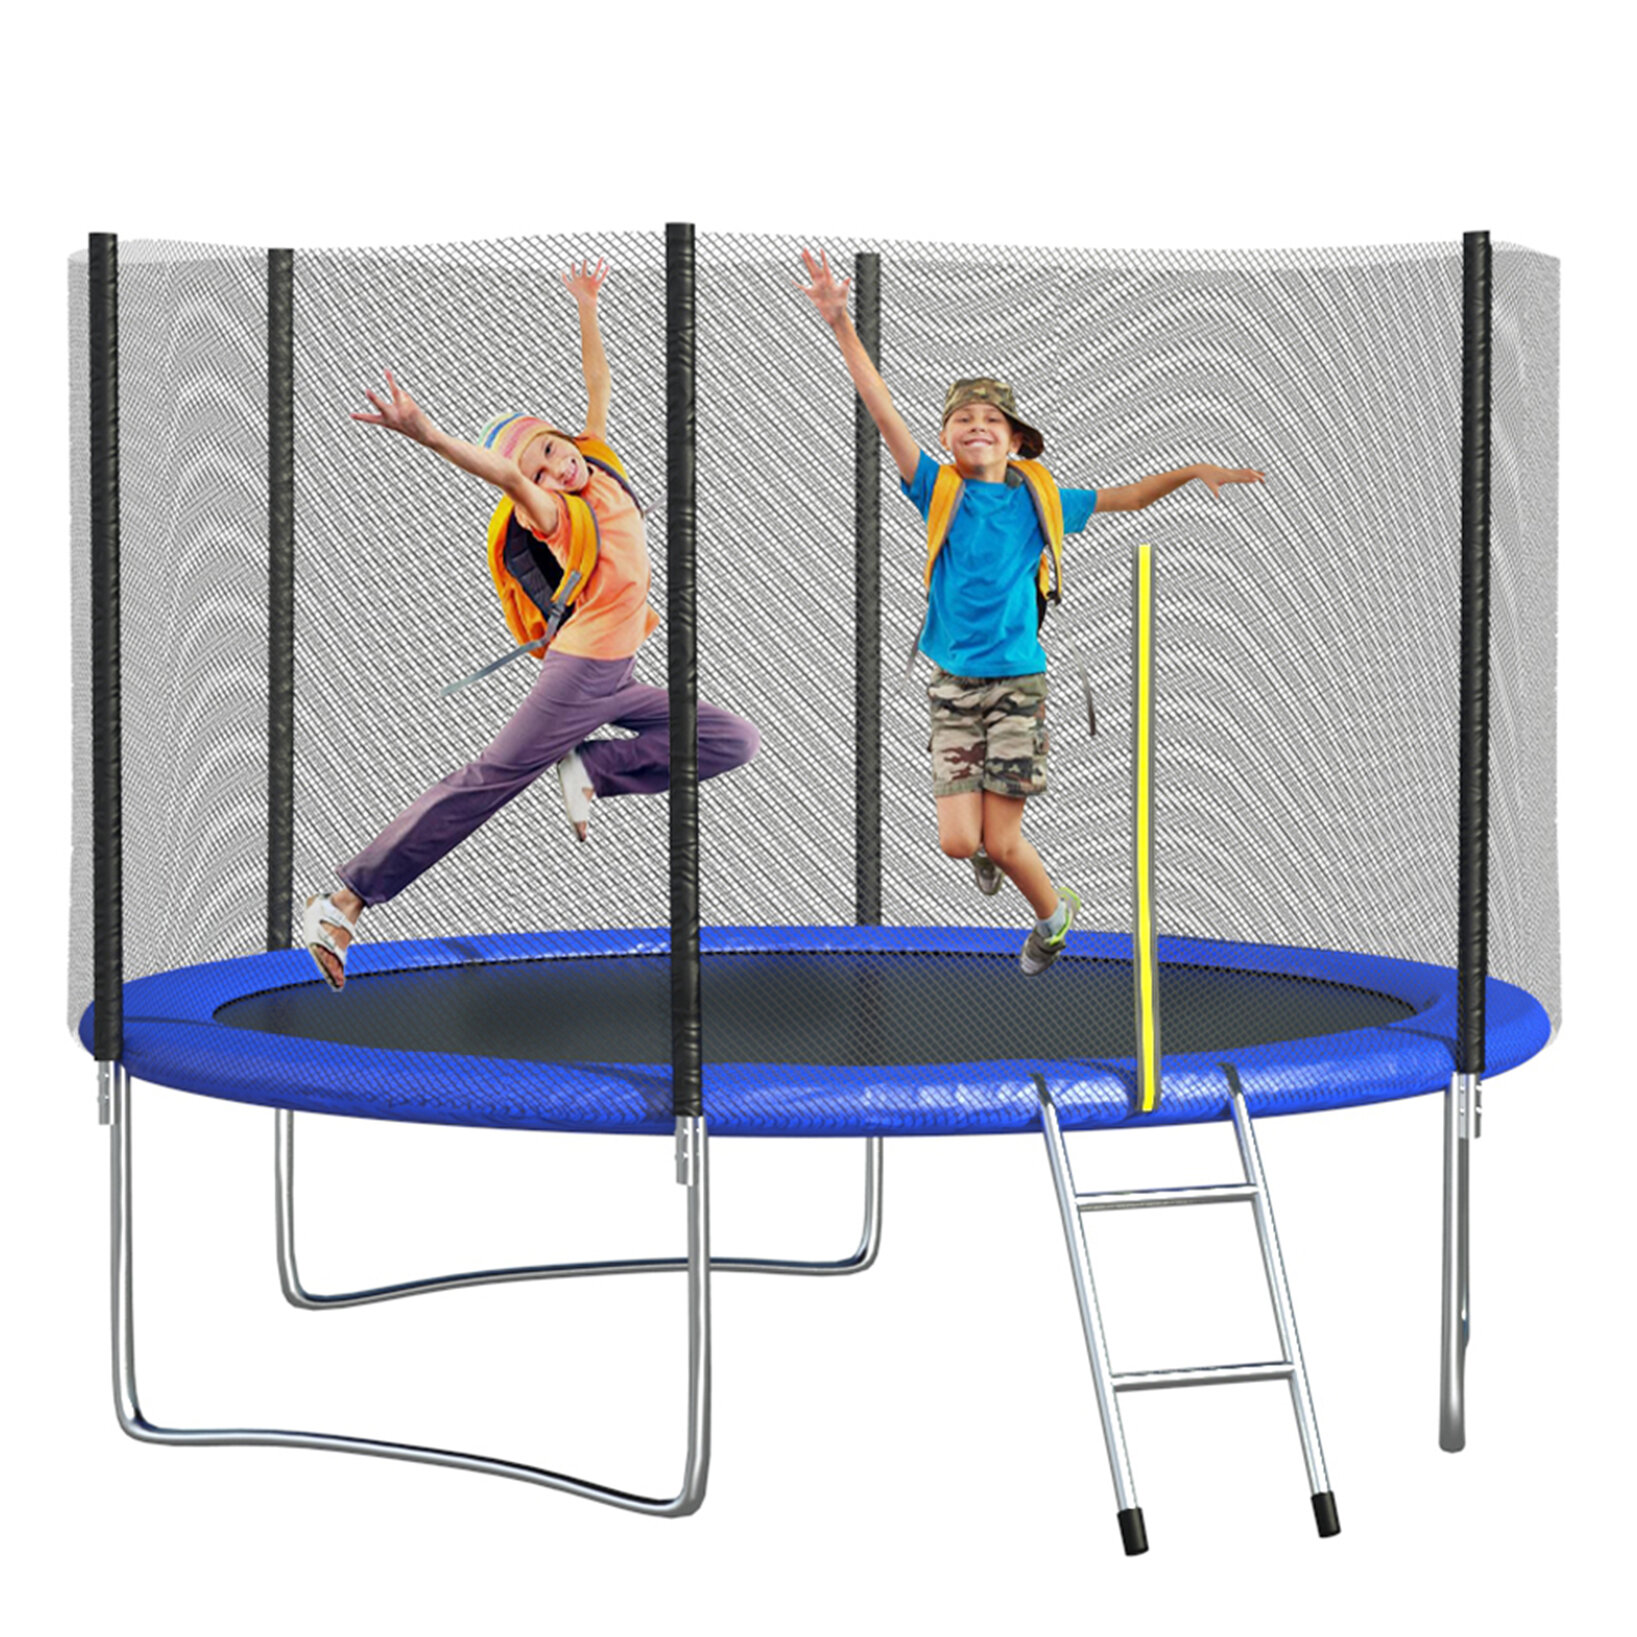 Outdoor Trampoline Fun Summer Exercise Fitness Toys 2 FT Kids Trampoline with Enclosure Net and Spring Cover Padding 